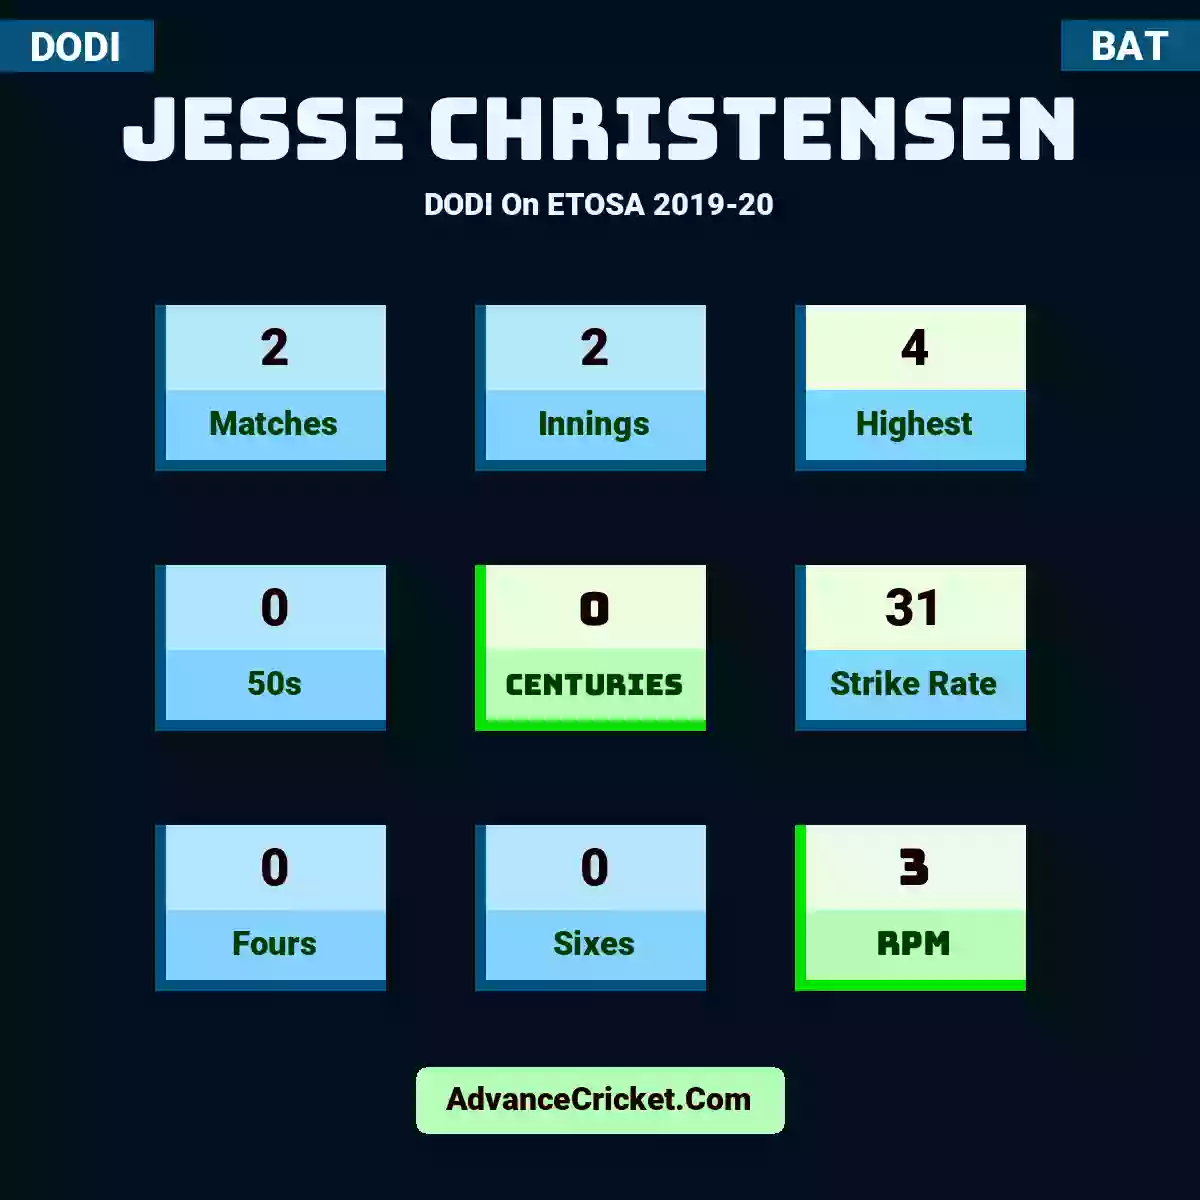 Jesse Christensen DODI  On ETOSA 2019-20, Jesse Christensen played 2 matches, scored 4 runs as highest, 0 half-centuries, and 0 centuries, with a strike rate of 31. J.Christensen hit 0 fours and 0 sixes, with an RPM of 3.